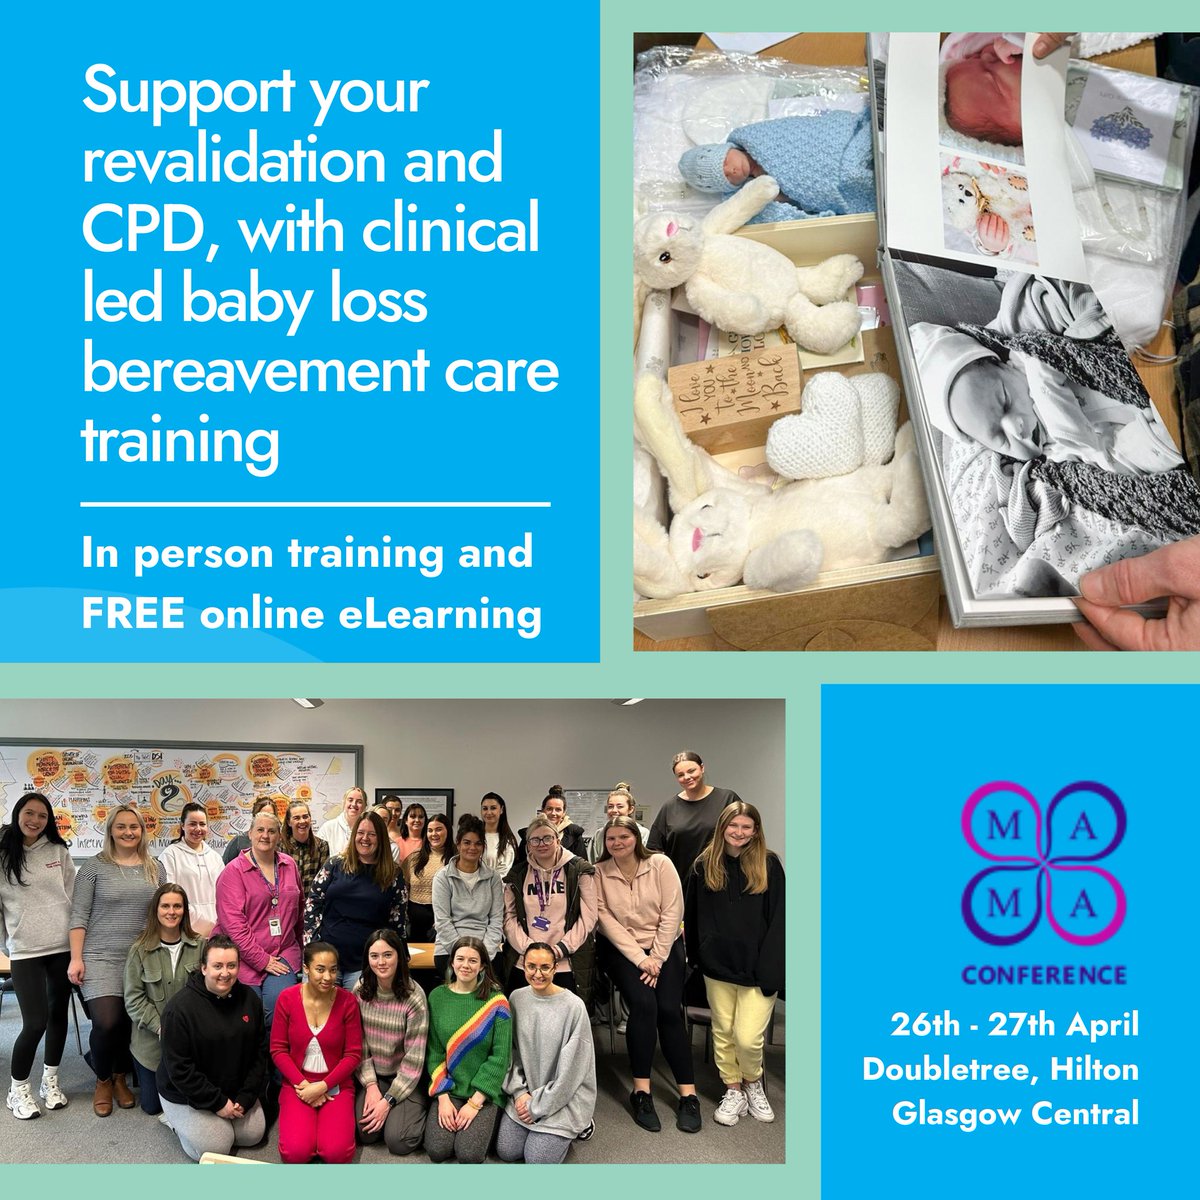 Join us at the @MamaConference to learn more about our training days & free online modules, or visit CuddleCot.com/training to start your journey toward enhanced expertise and CPD. Let's make a difference in the lives of those experiencing loss #midwife #midwifery